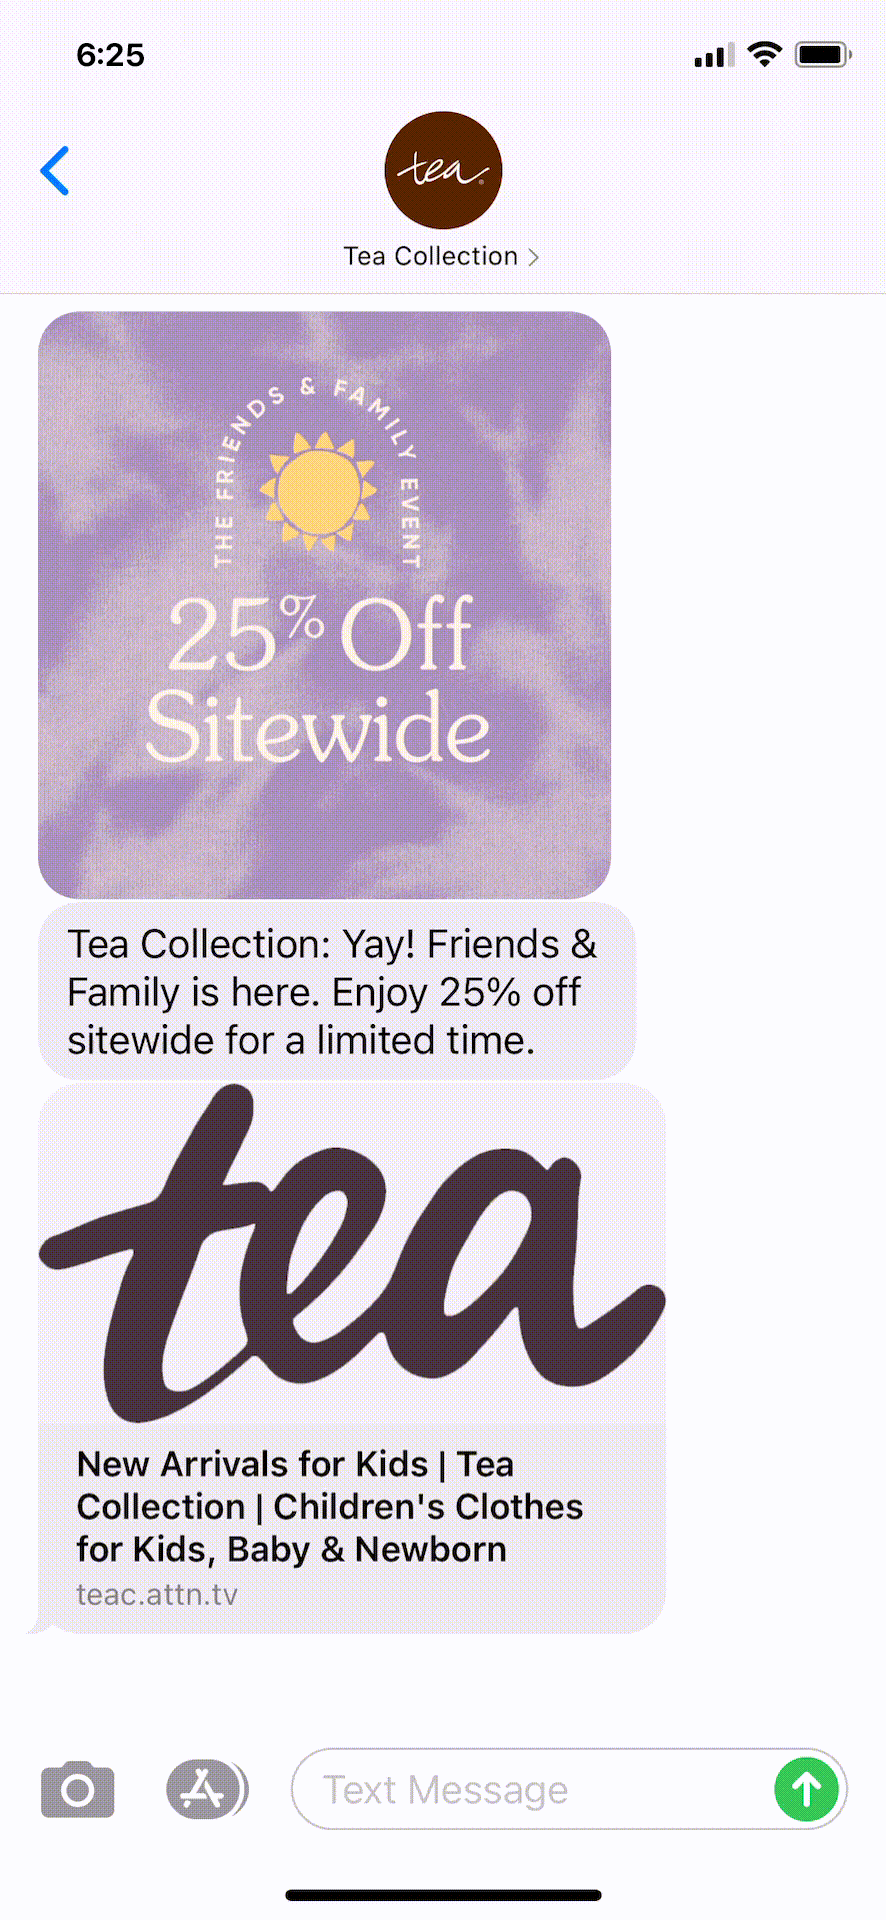 Tea-Collection-Text-Message-Marketing-Example-04.28.2021